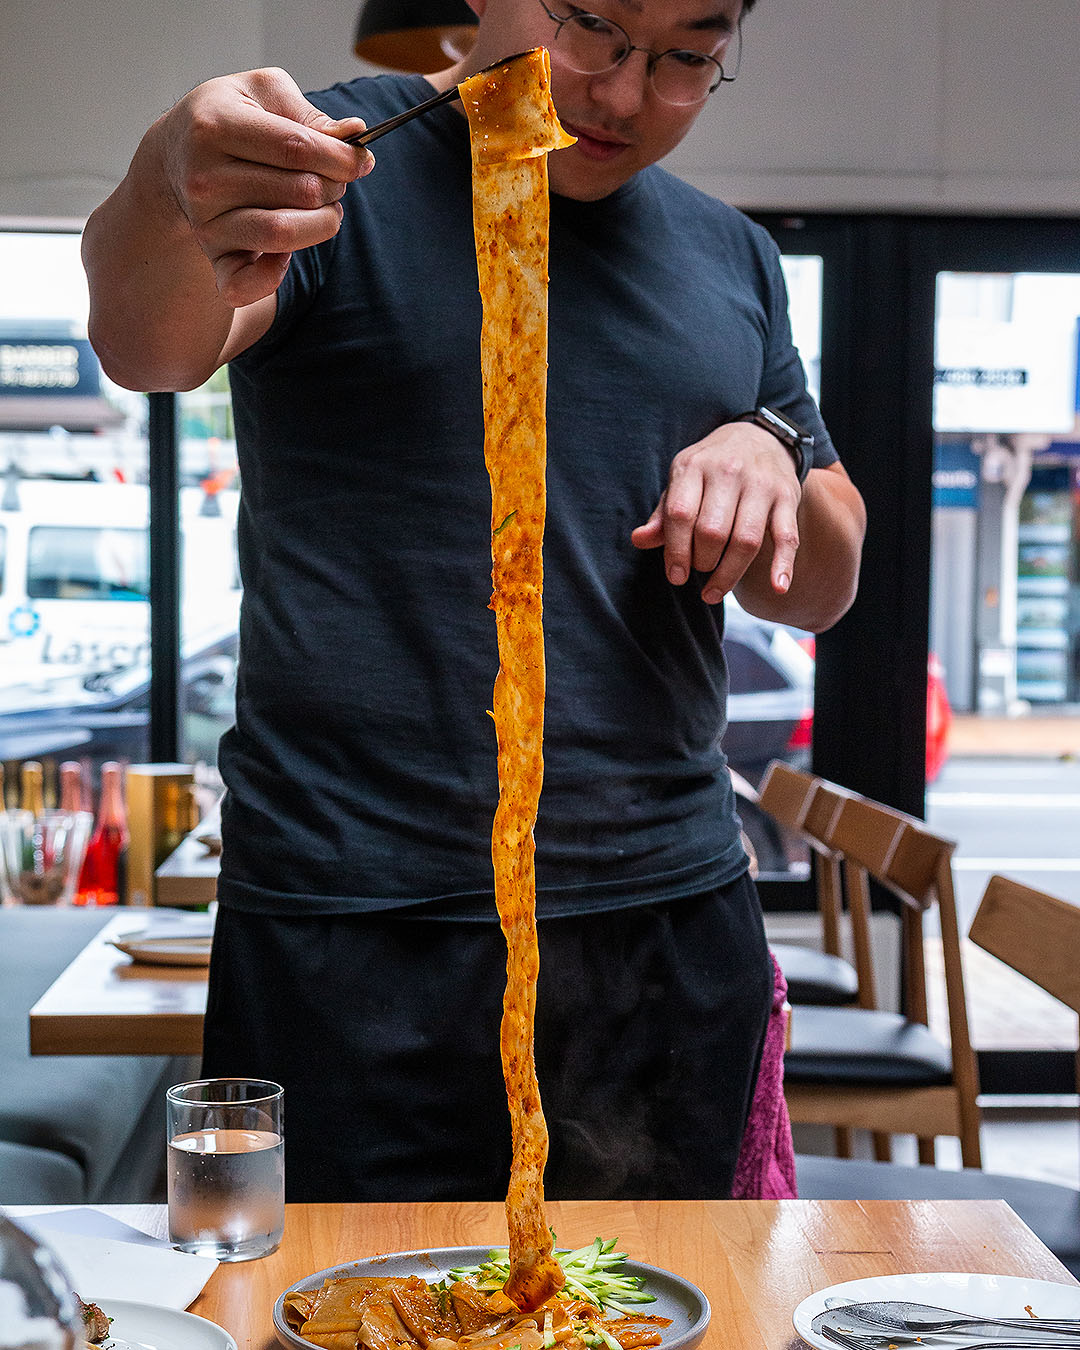 Jason Kim pulls up a metre-long noodle at Tokki, one of the best gluten-free eateries in auckland.